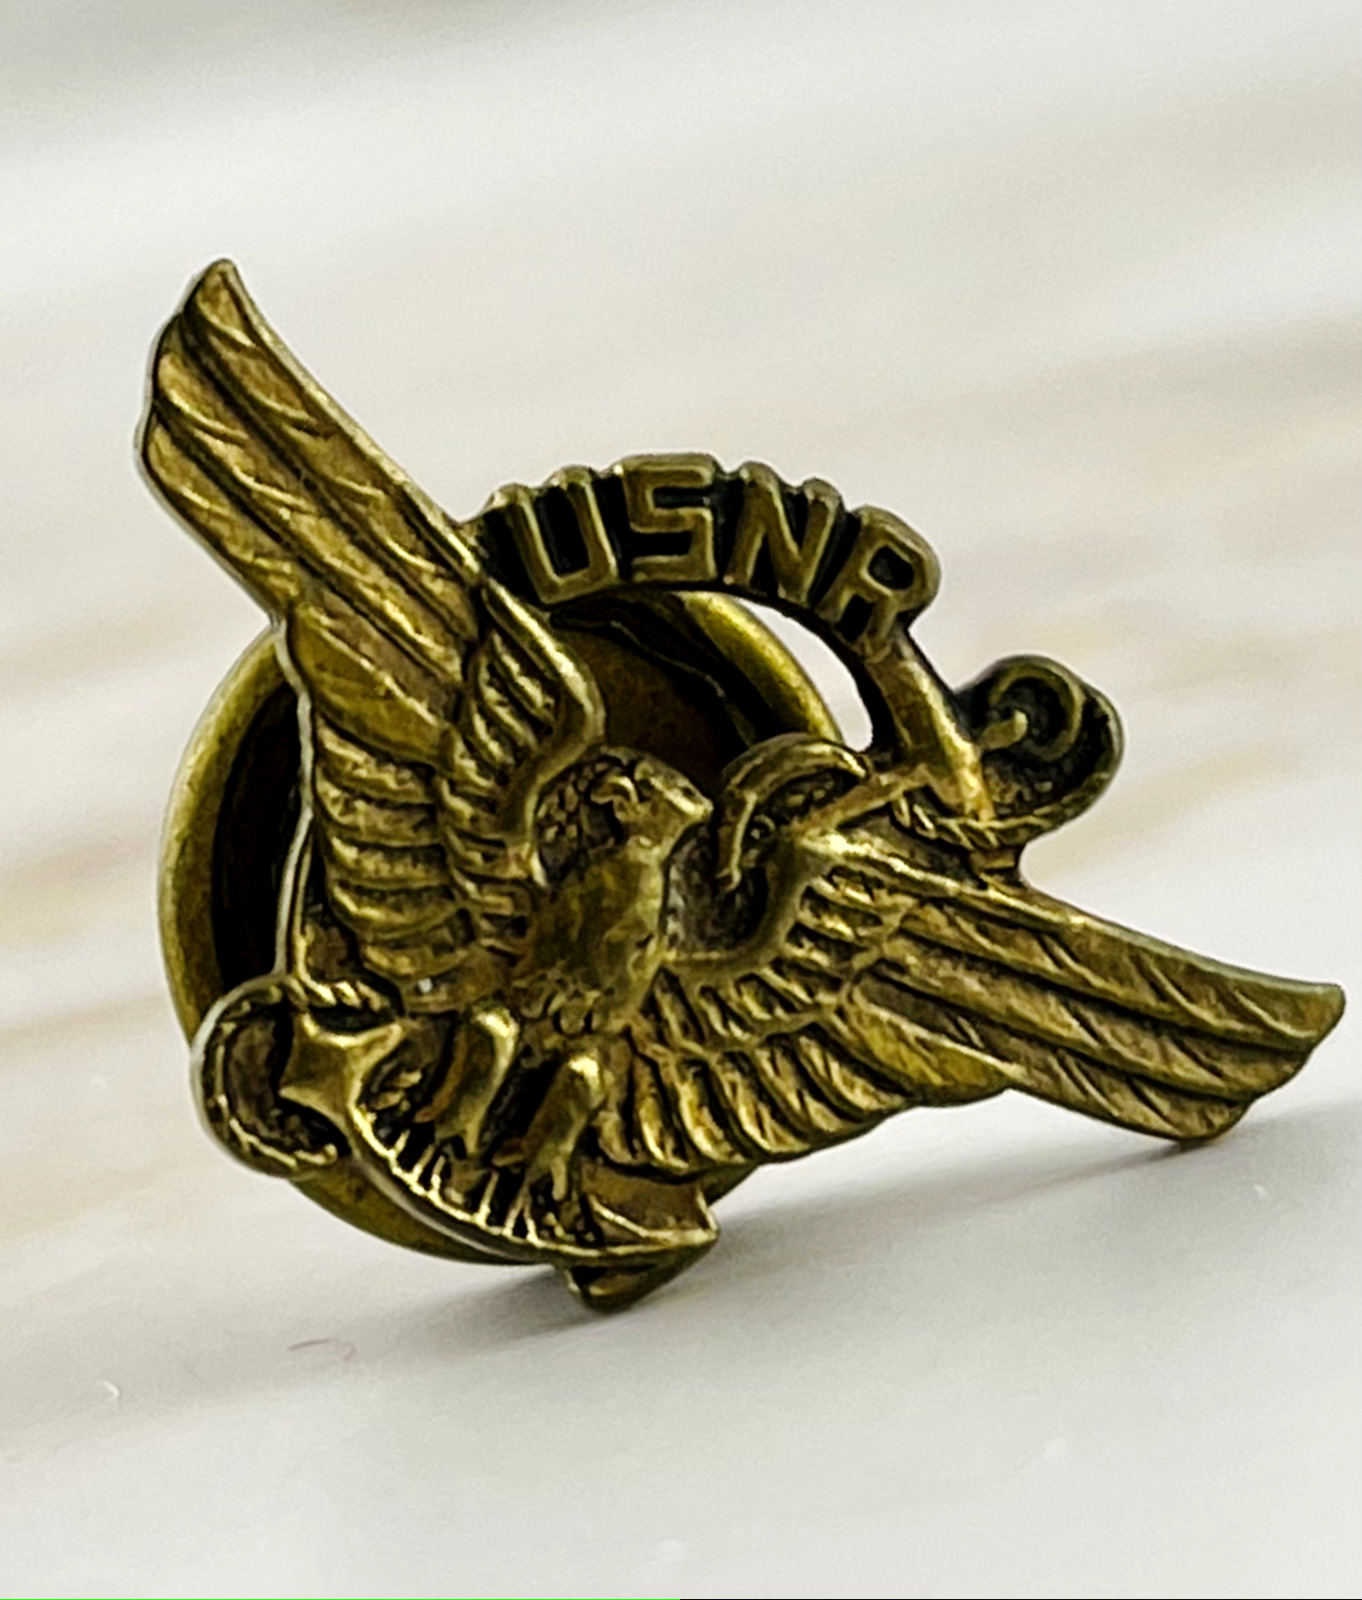 USNR United States Navy Reserve Eagle Button Pin Screw Back Closure